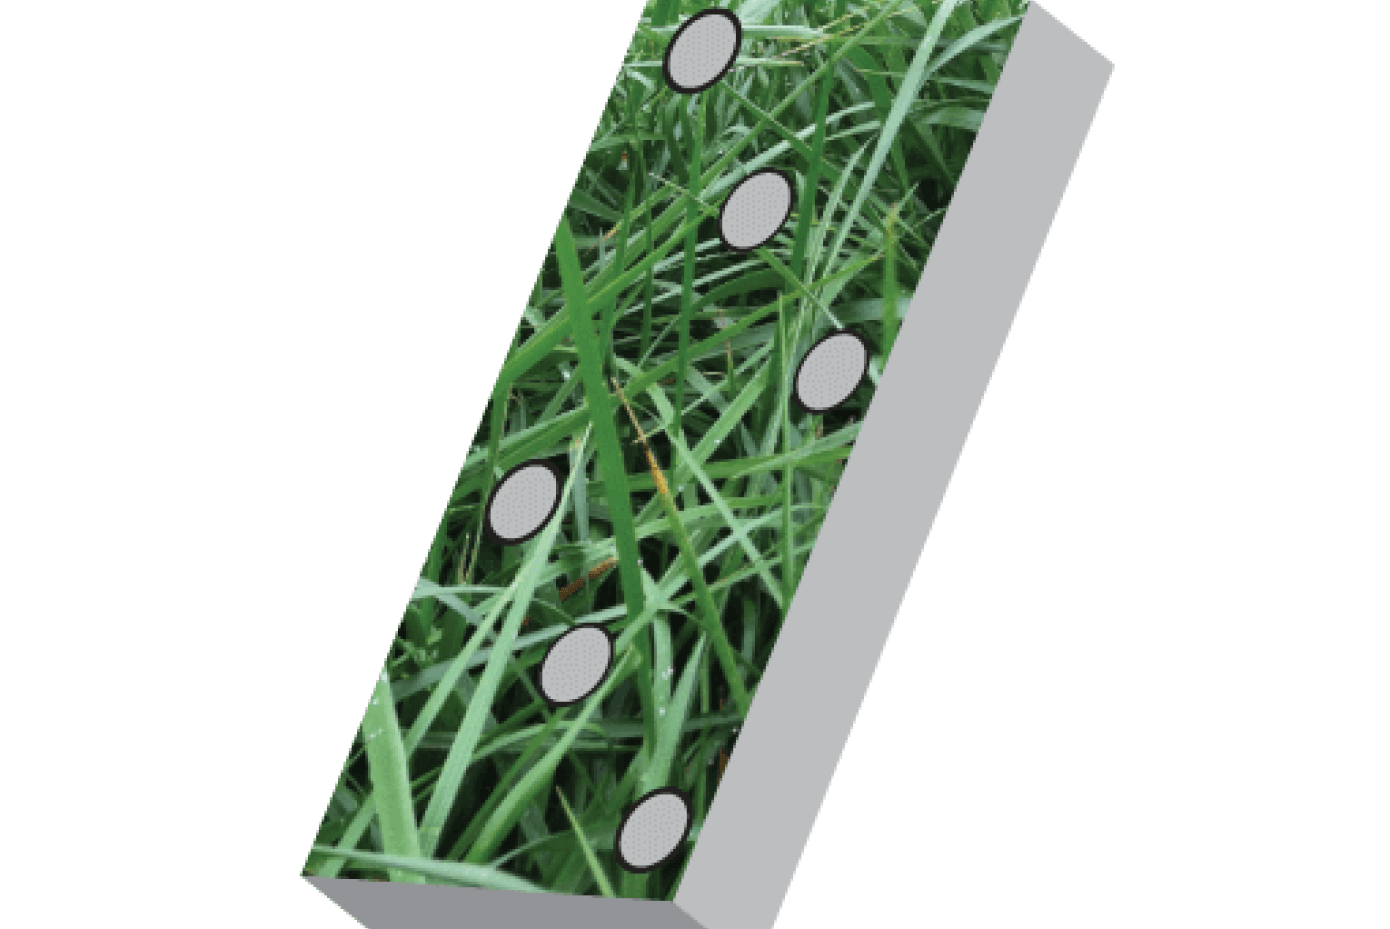 Illustration of domino with image of grass water overlaid on it.